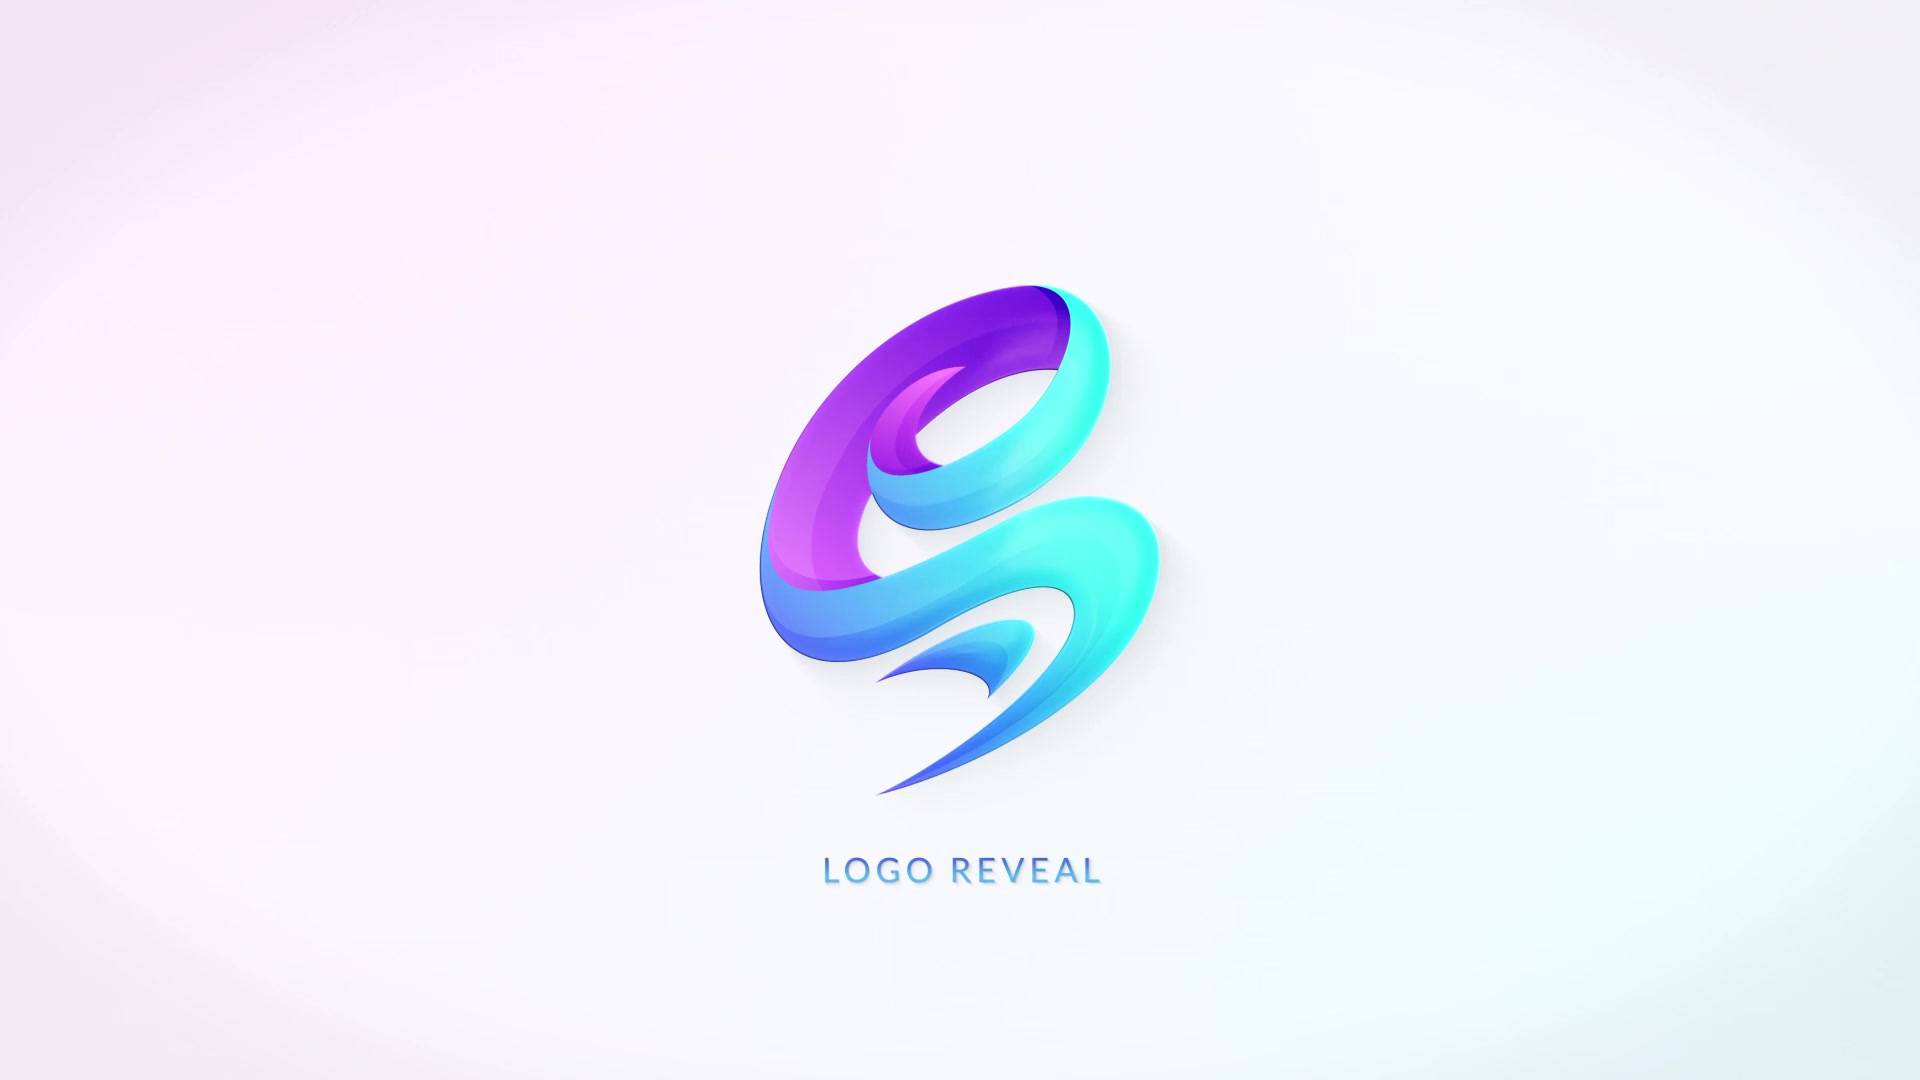 mosaic logo reveal after effects free download